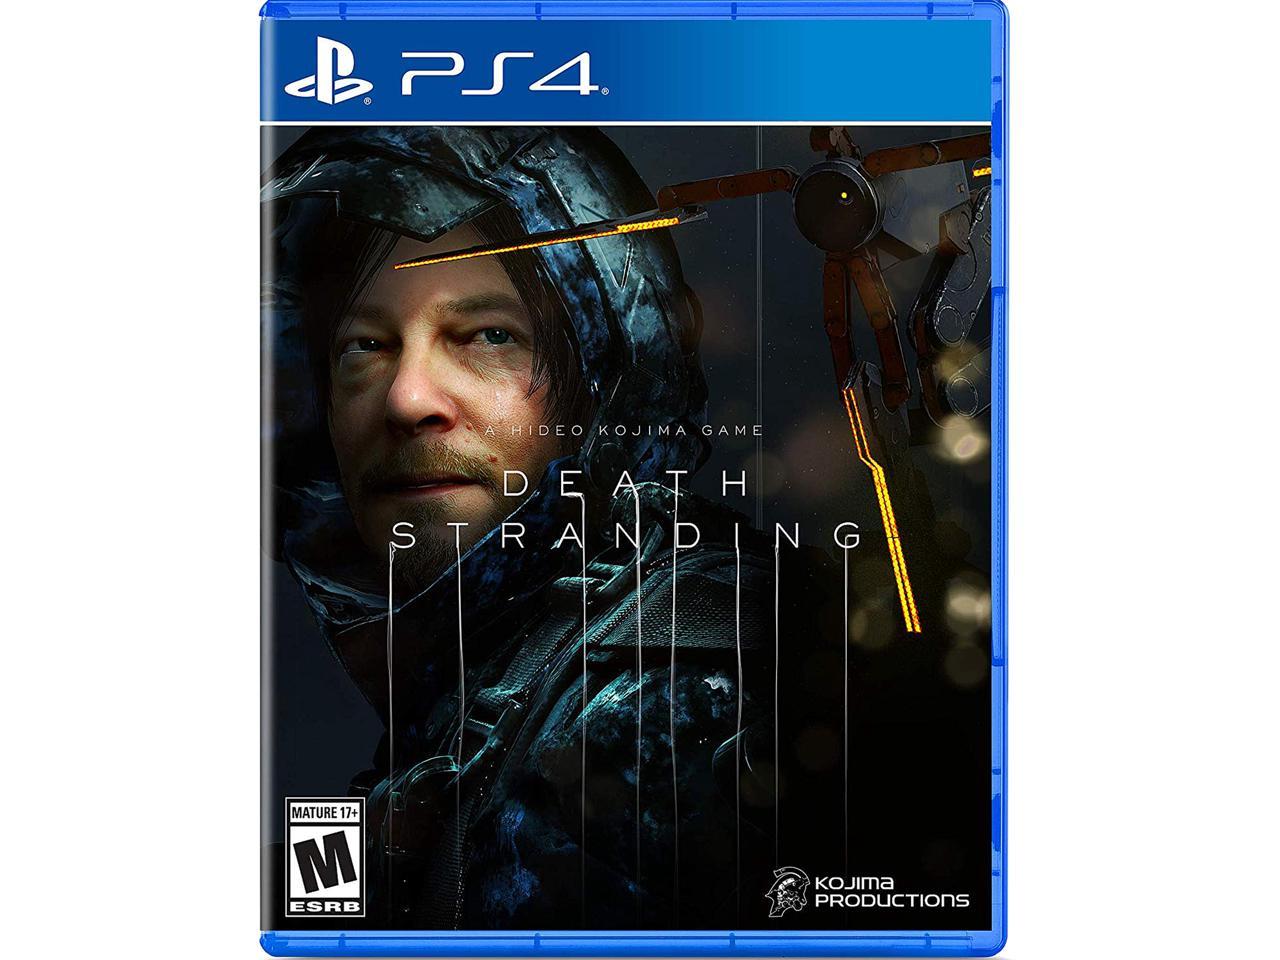 death stranding collector's edition price